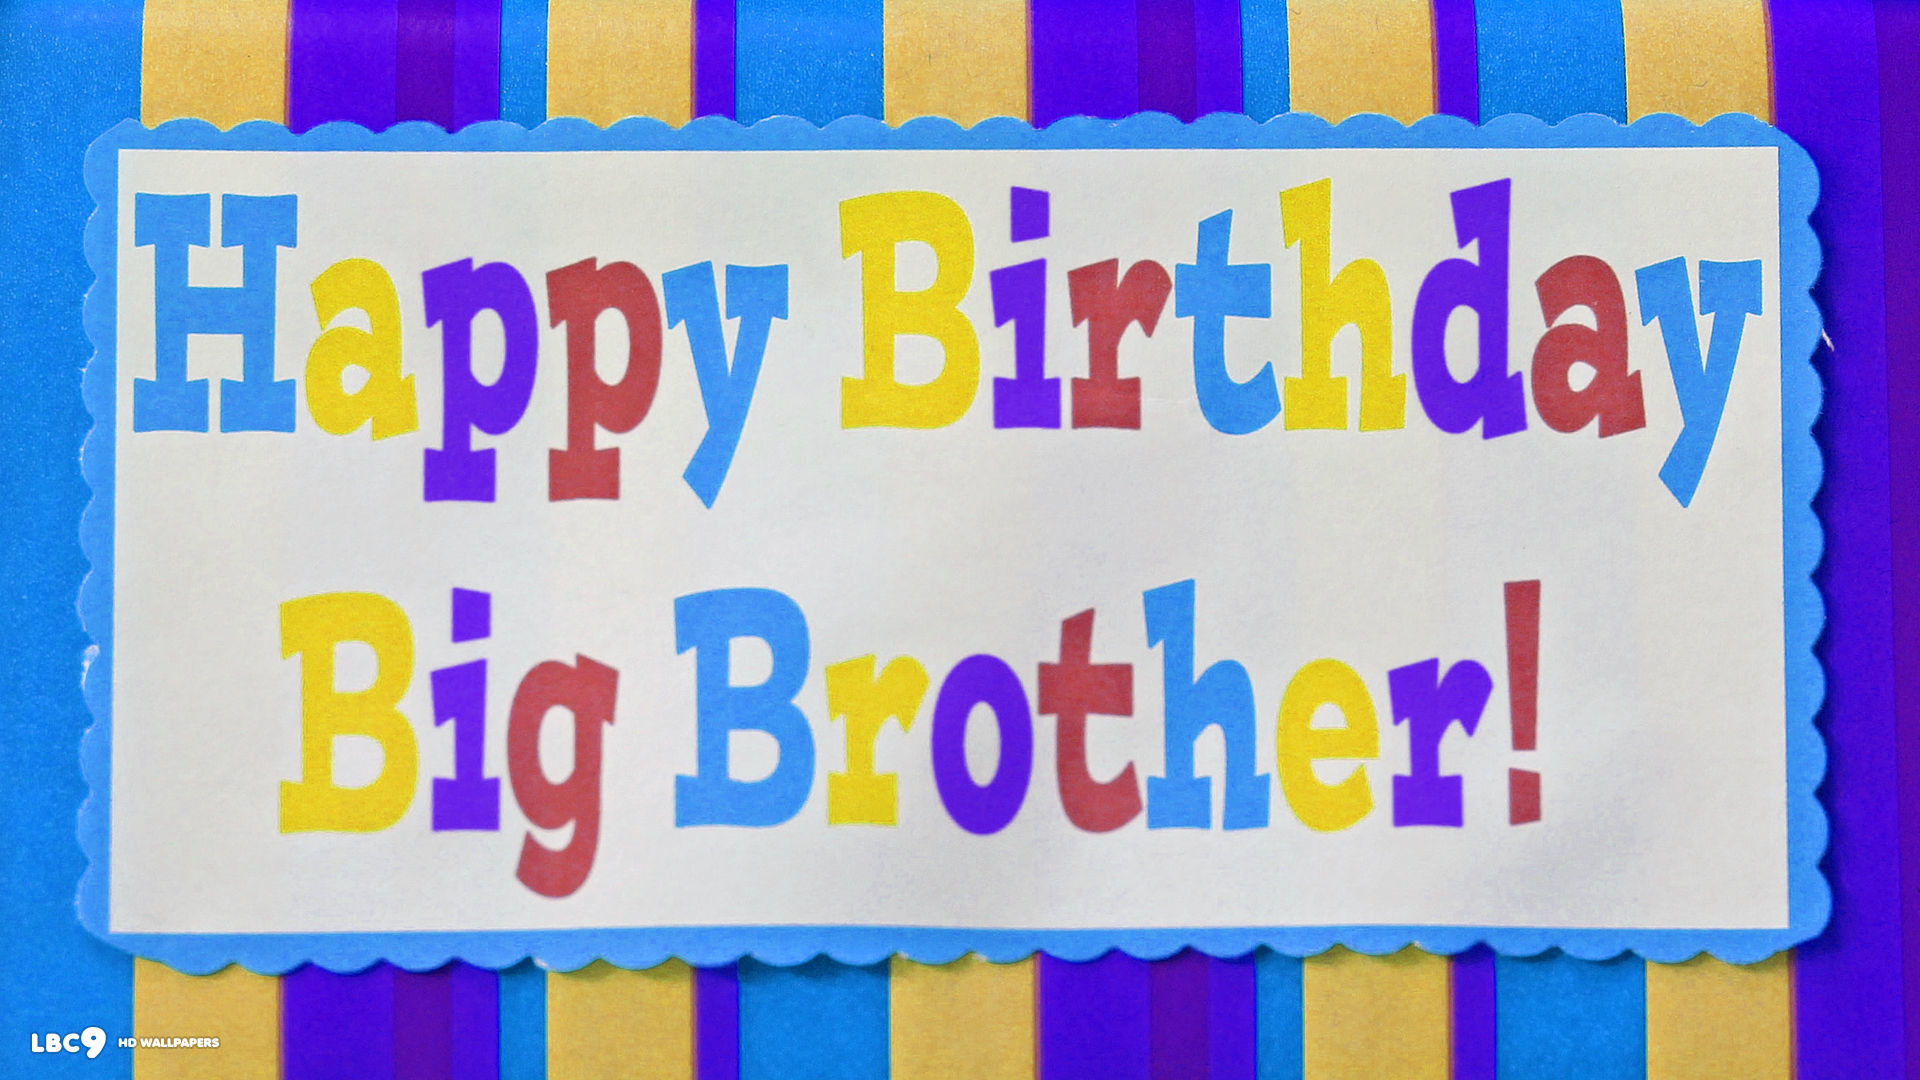 1920x1080 happy birthday big brother card colored stripes text wallpaper